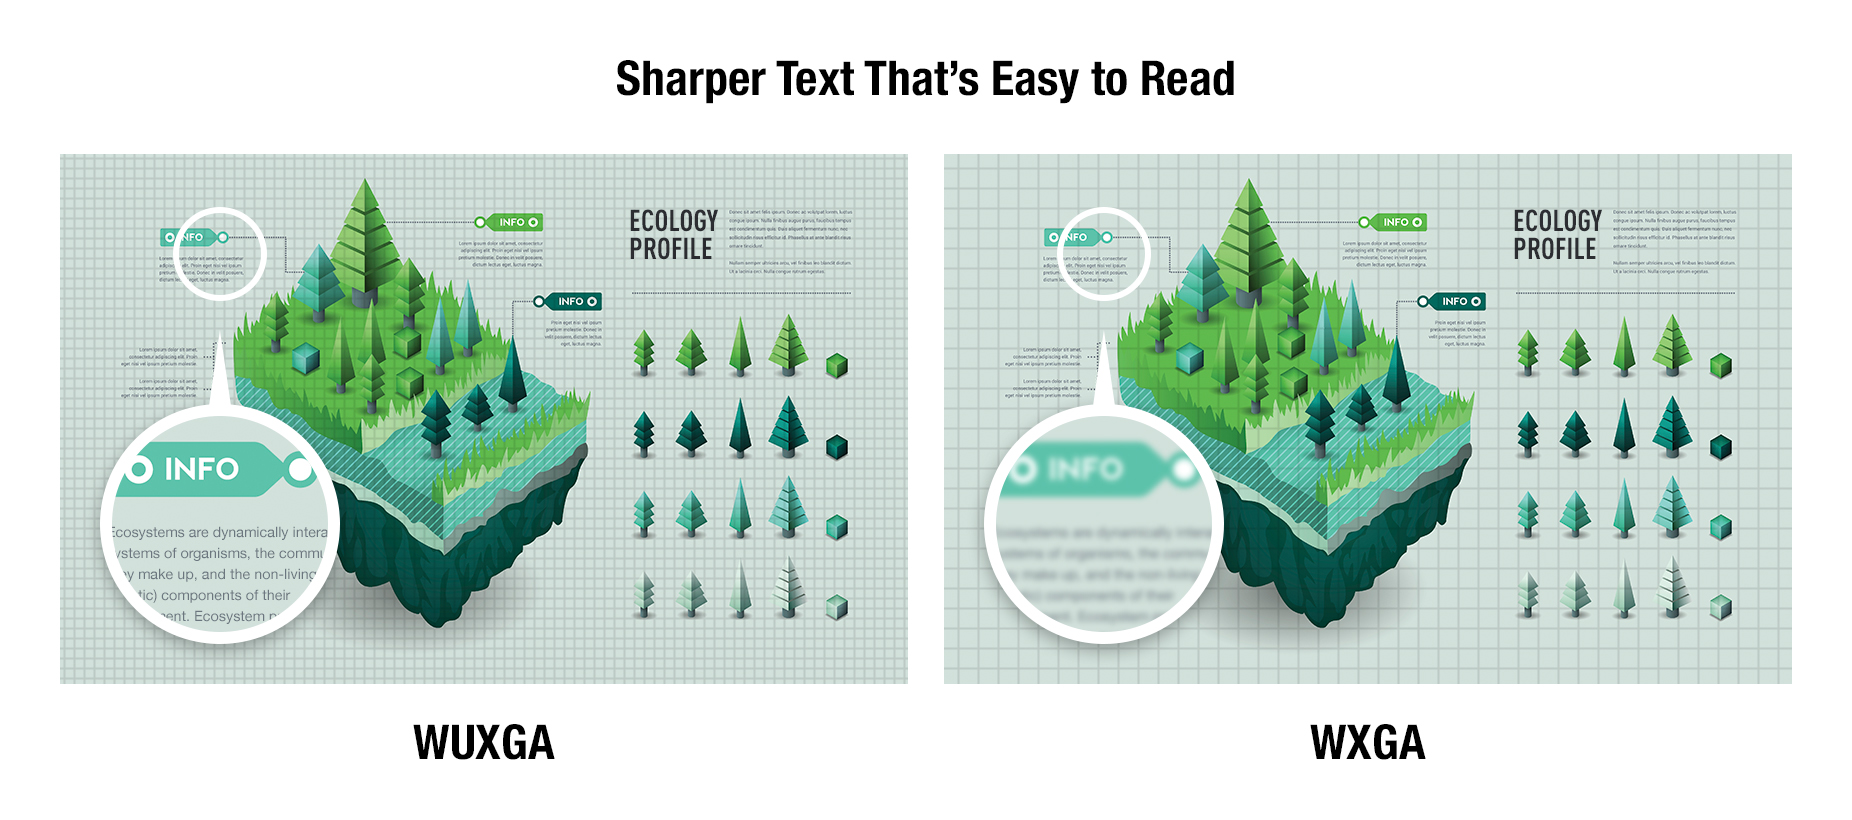 Sharper Text That's Easy to Read